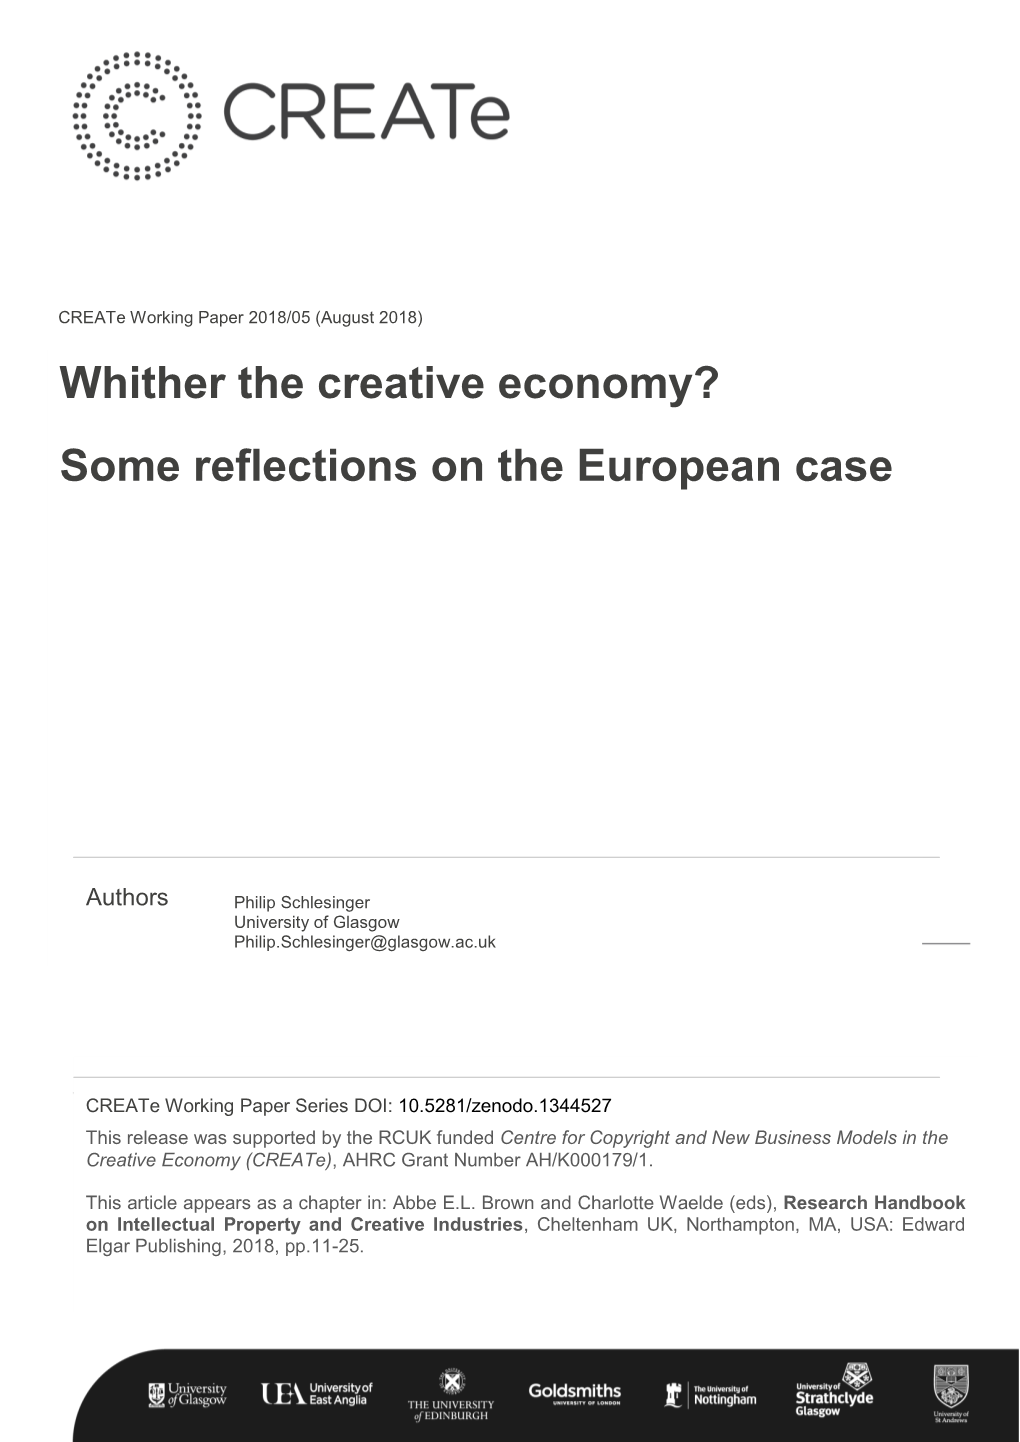 Whither the Creative Economy? Some Reflections on the European Case